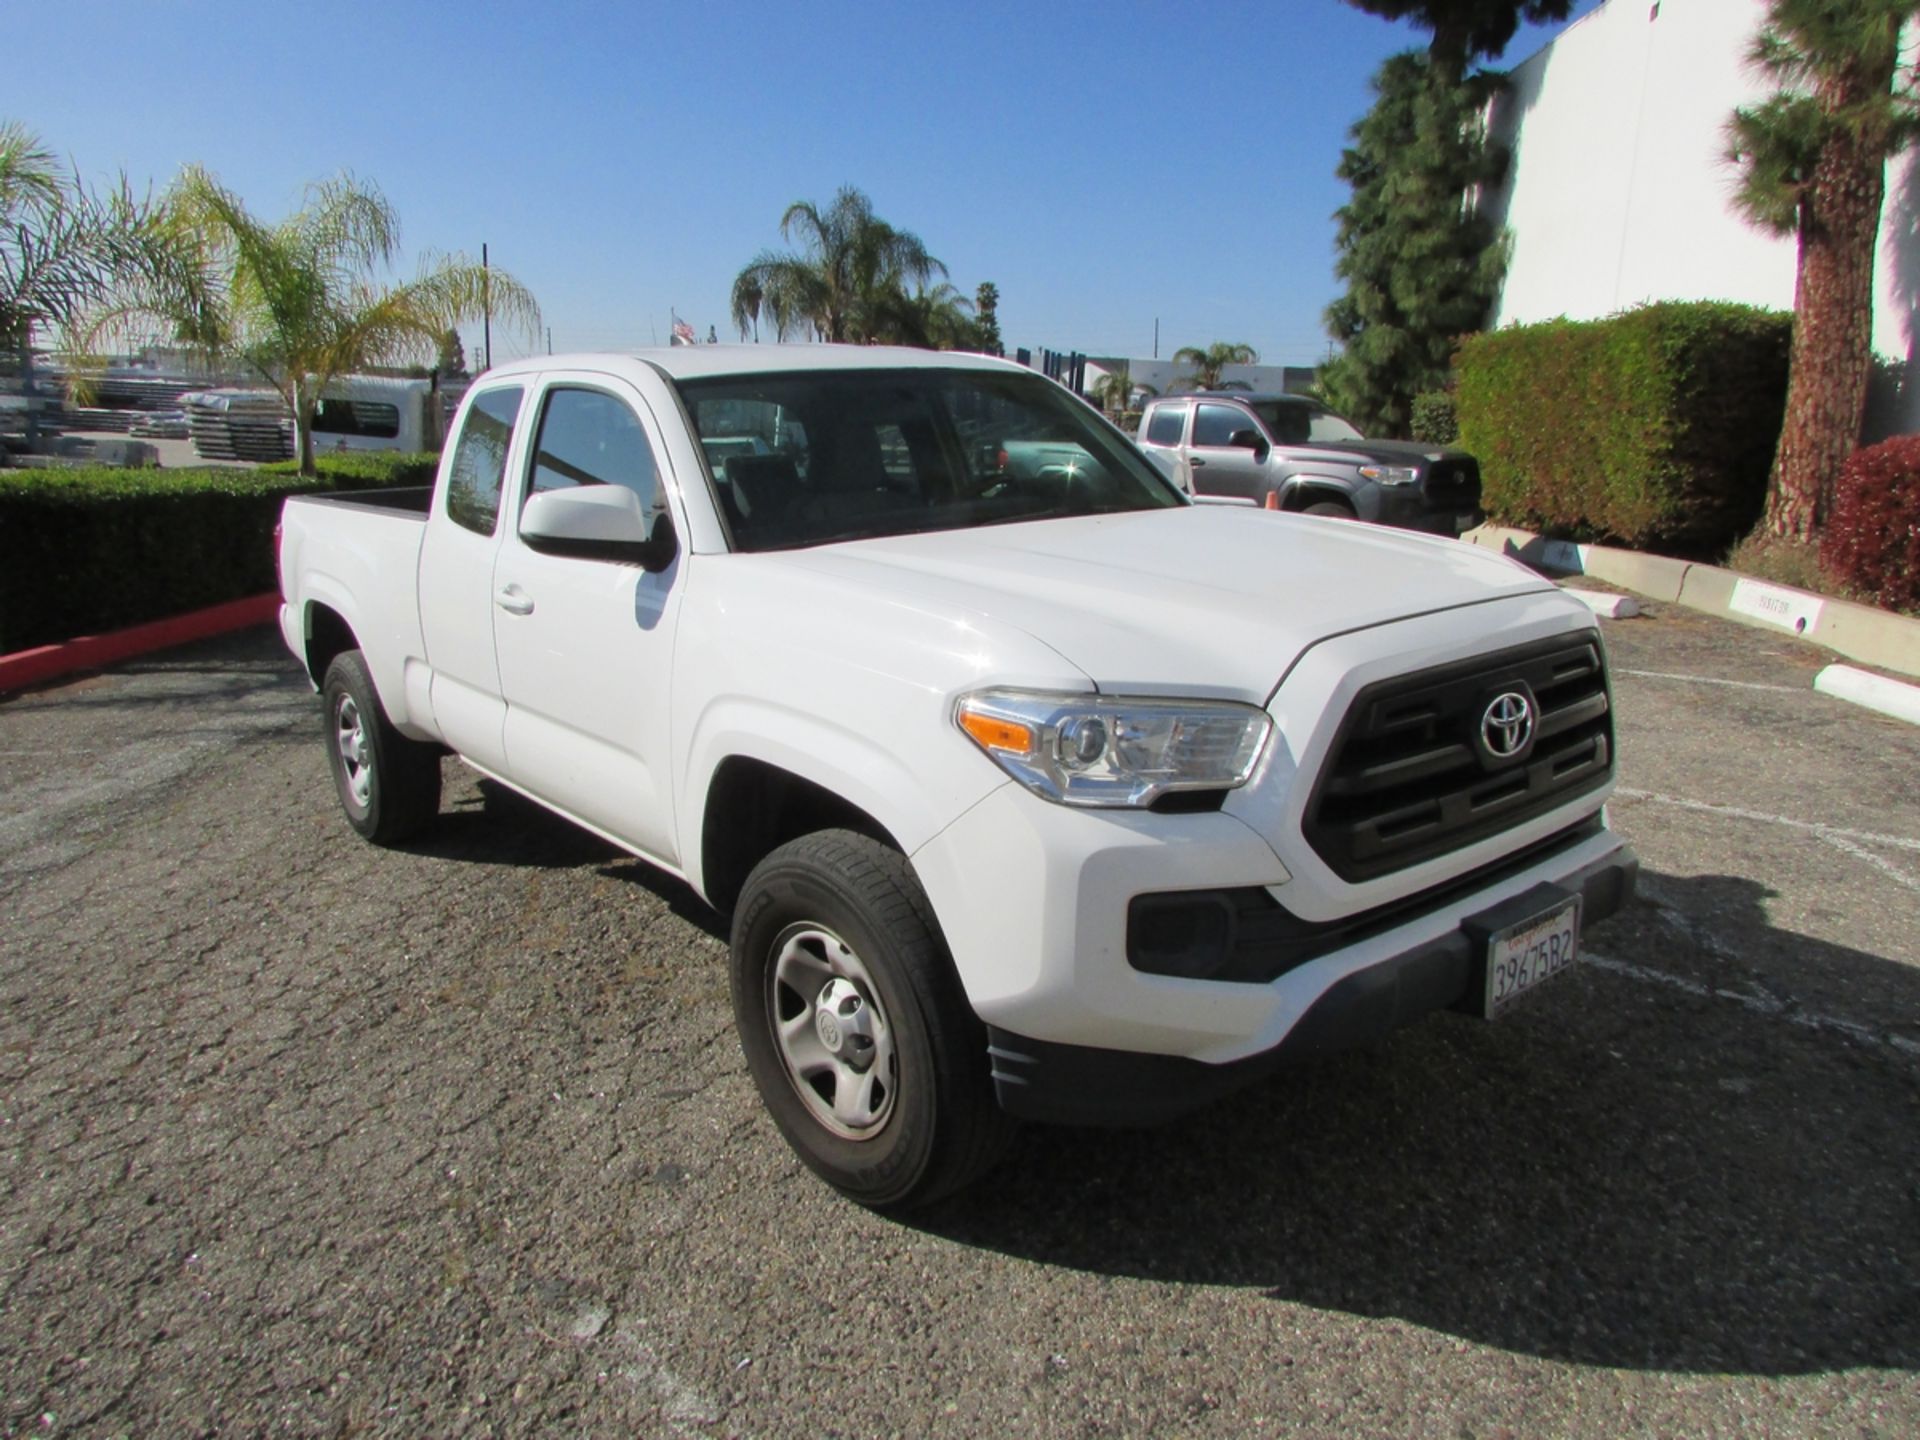 2016 TOYOTA TACOMA 2X4 EXTENDED CAB PICKUP TRUCK, 6' BED, 2.7L INLINE 4 CYLINDER ENGINE, AUTOMATIC - Image 9 of 19